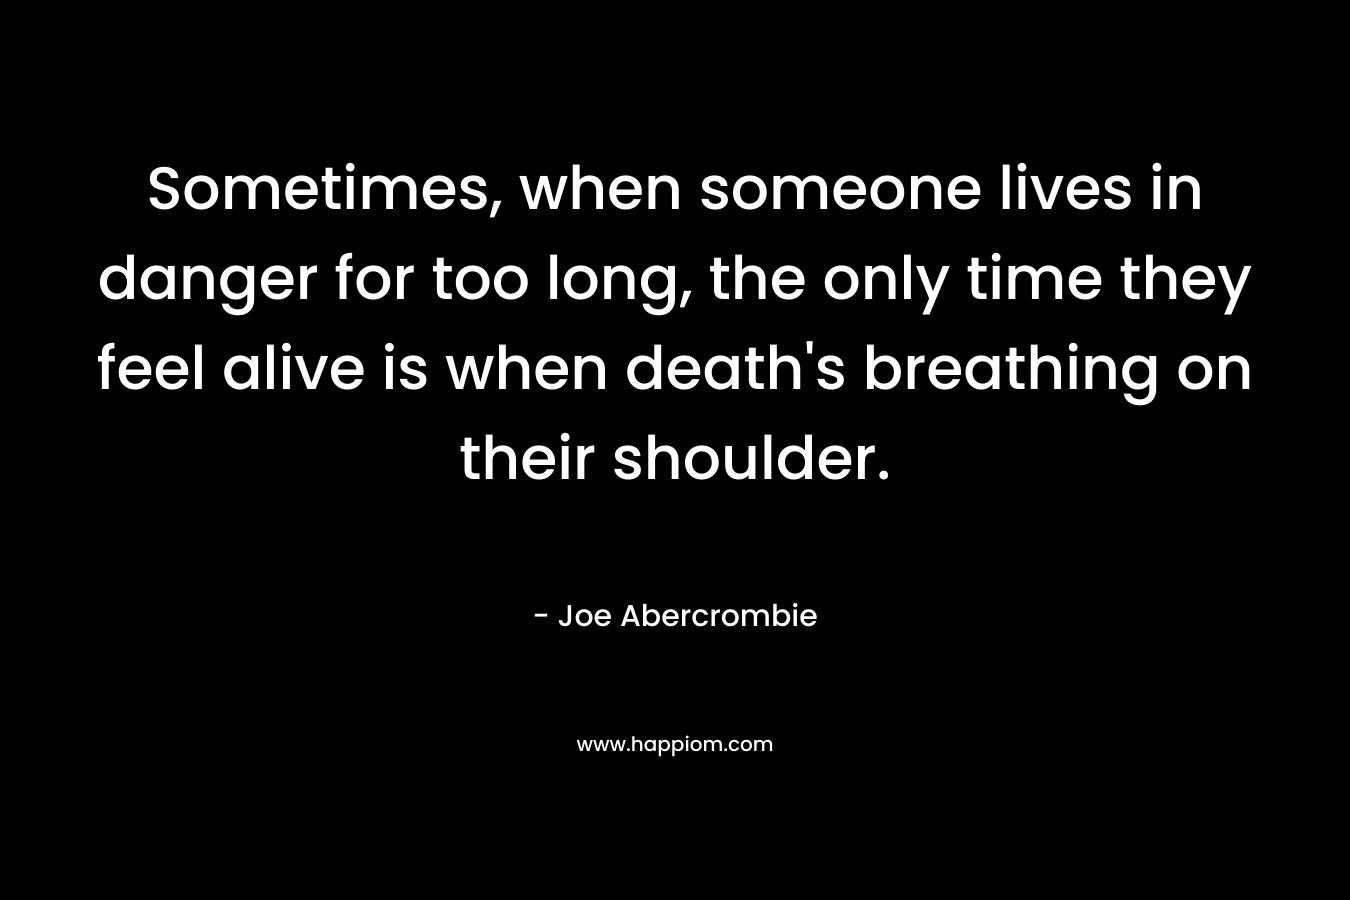 Sometimes, when someone lives in danger for too long, the only time they feel alive is when death’s breathing on their shoulder. – Joe Abercrombie